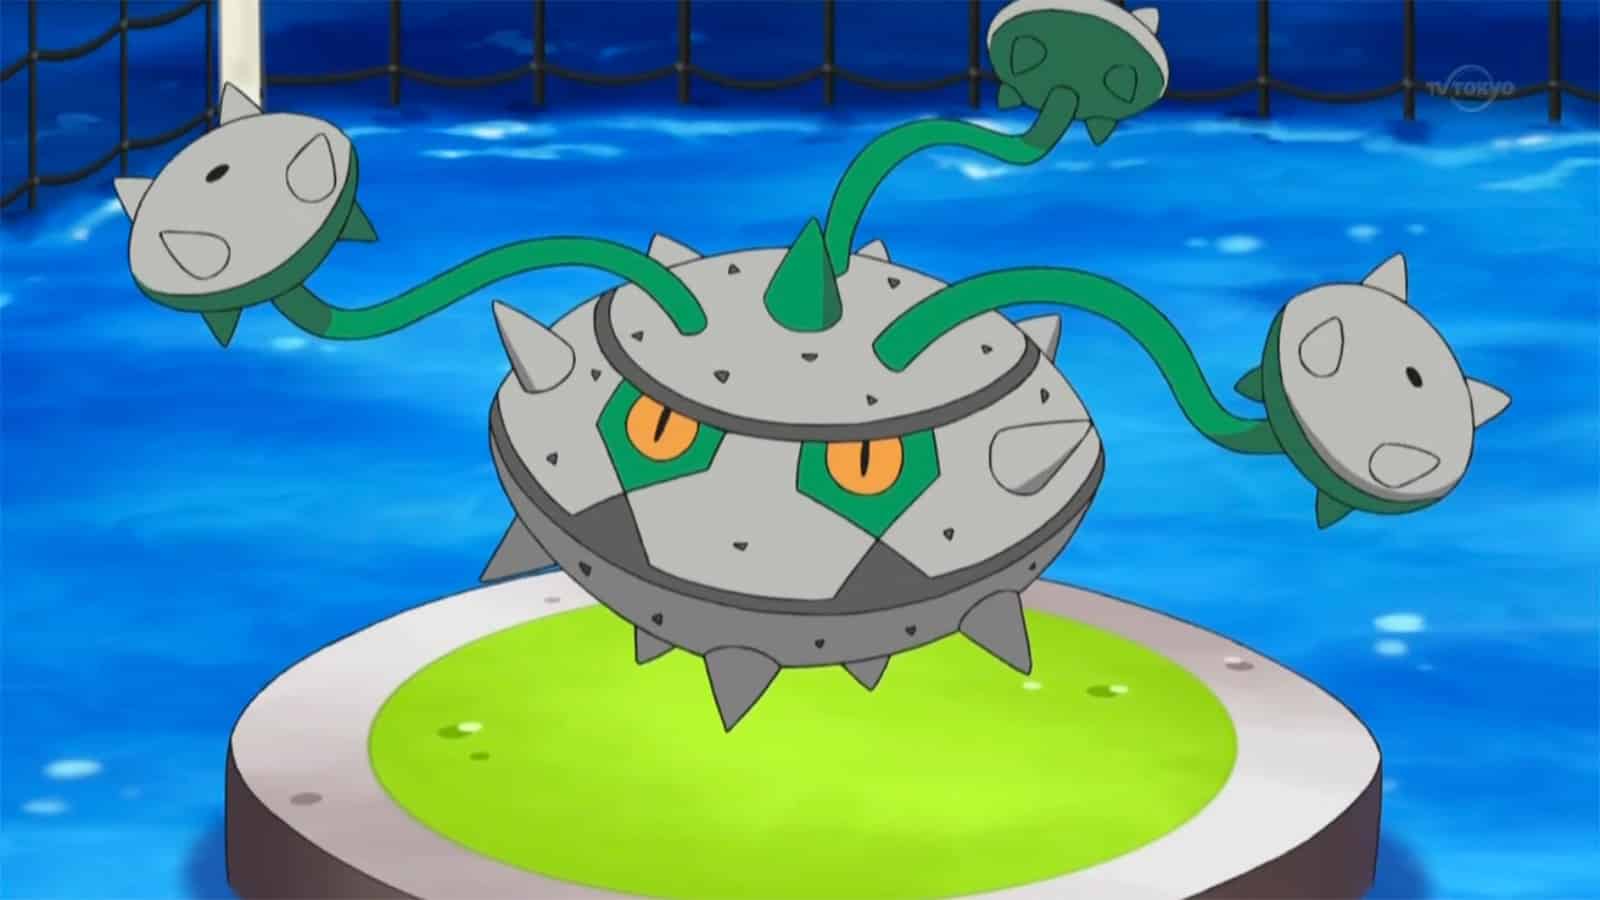 An image of Ferrothorn, one of the best grass-type Pokemon